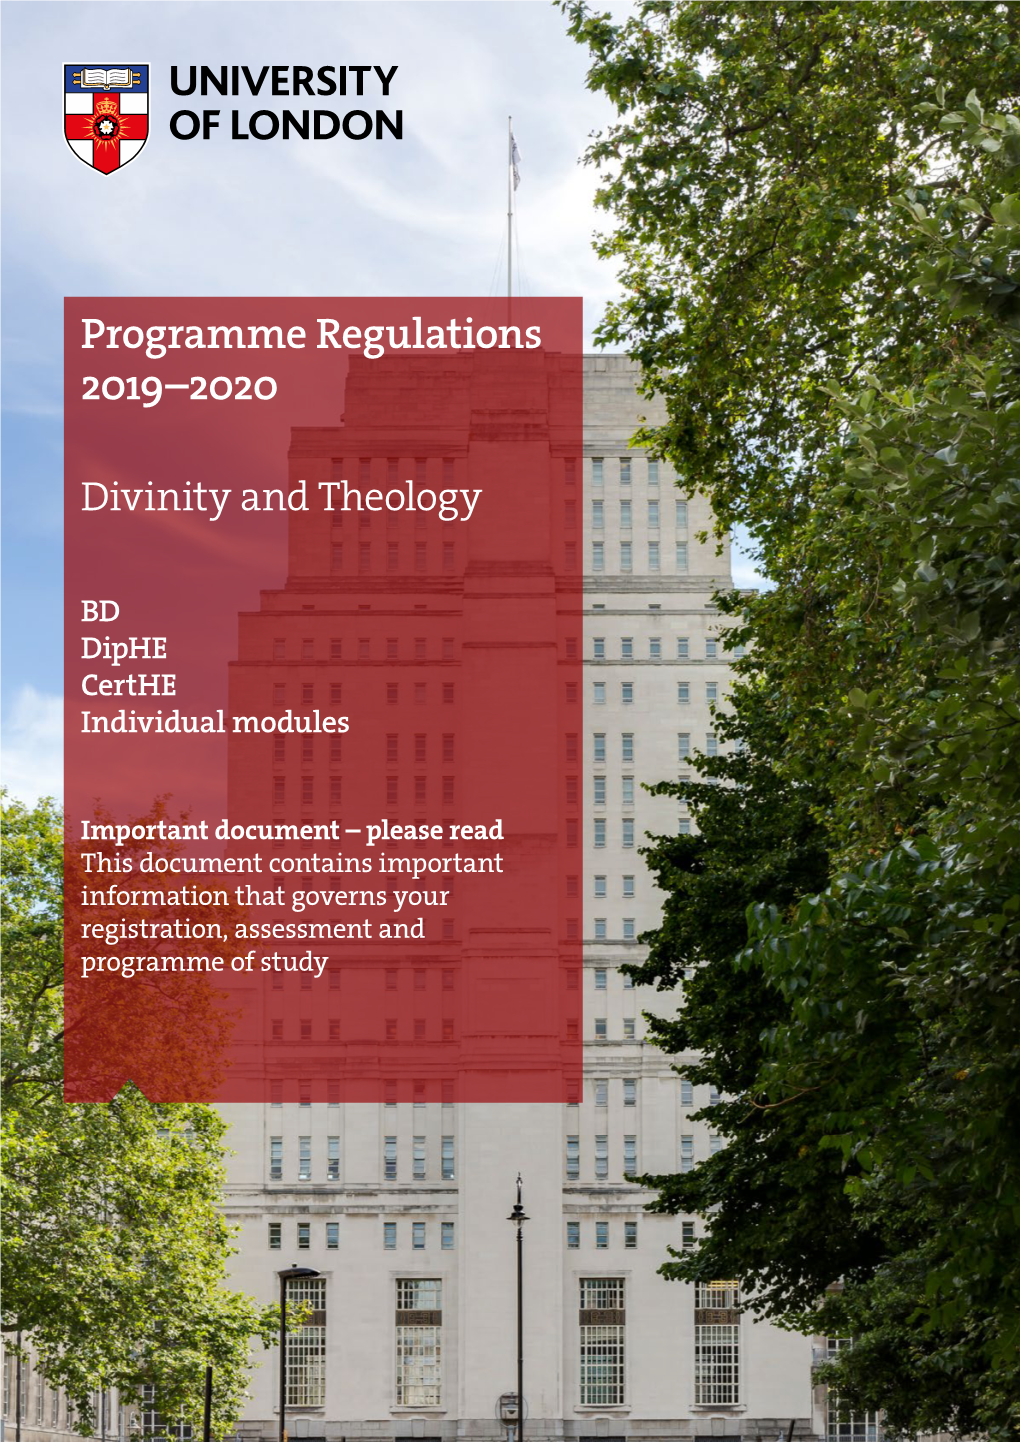 Divinity and Theology Regulations 2019-2020